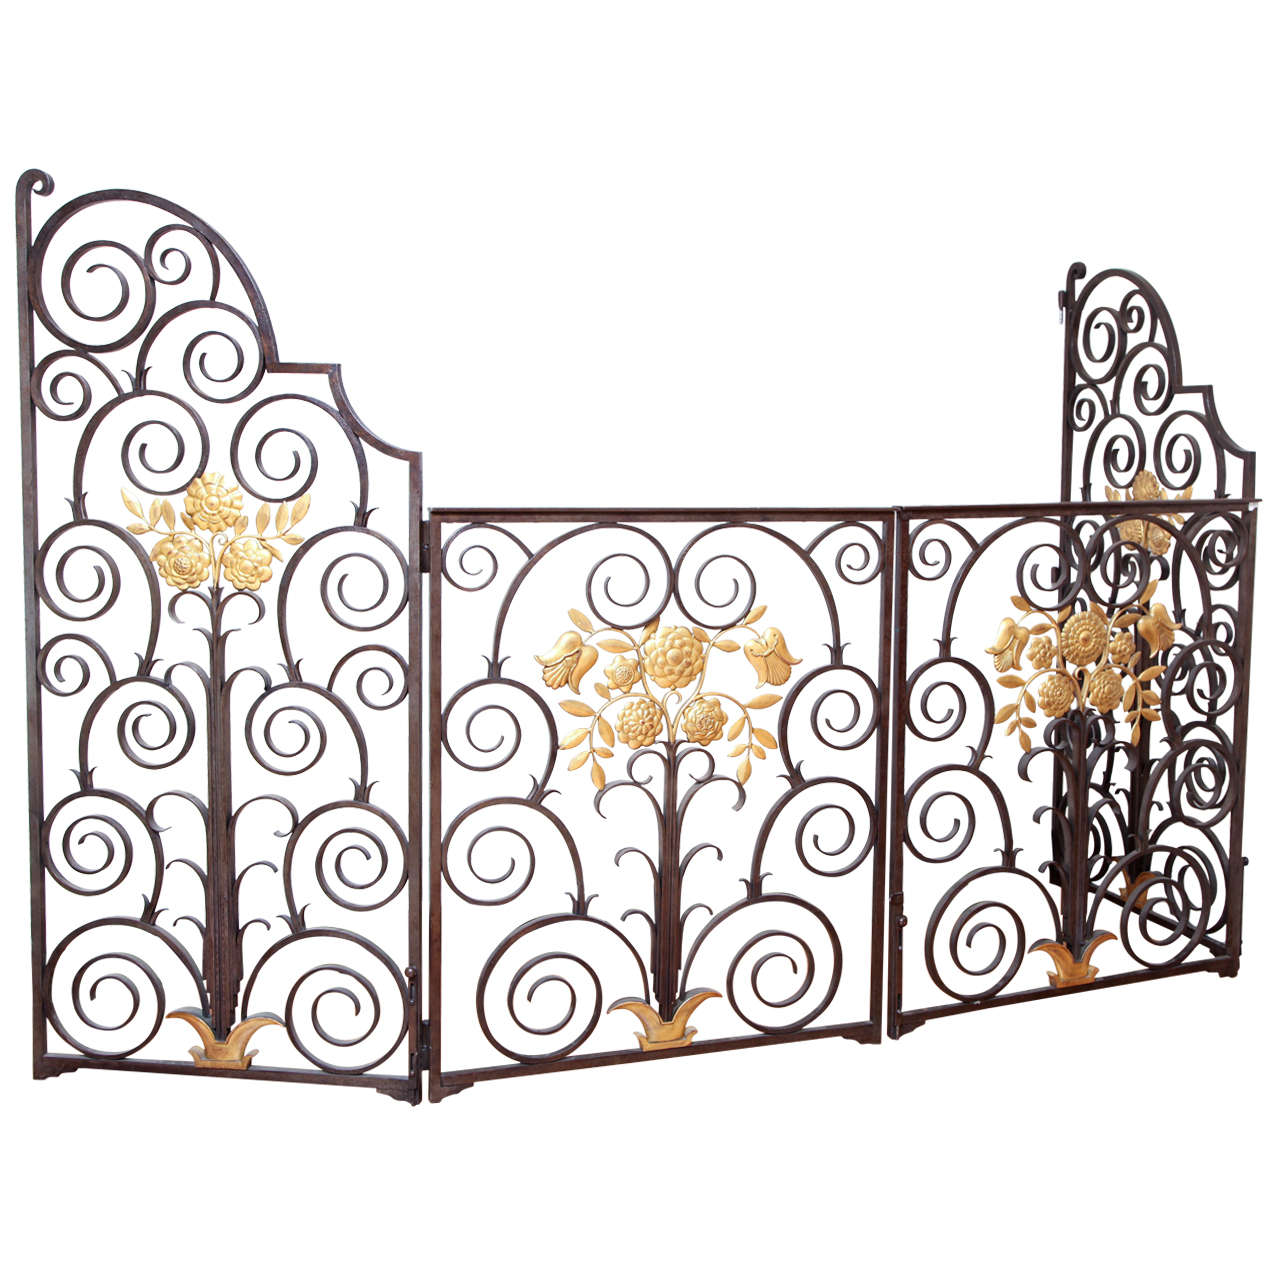 French 1940s Wrought Iron Screen/Gate